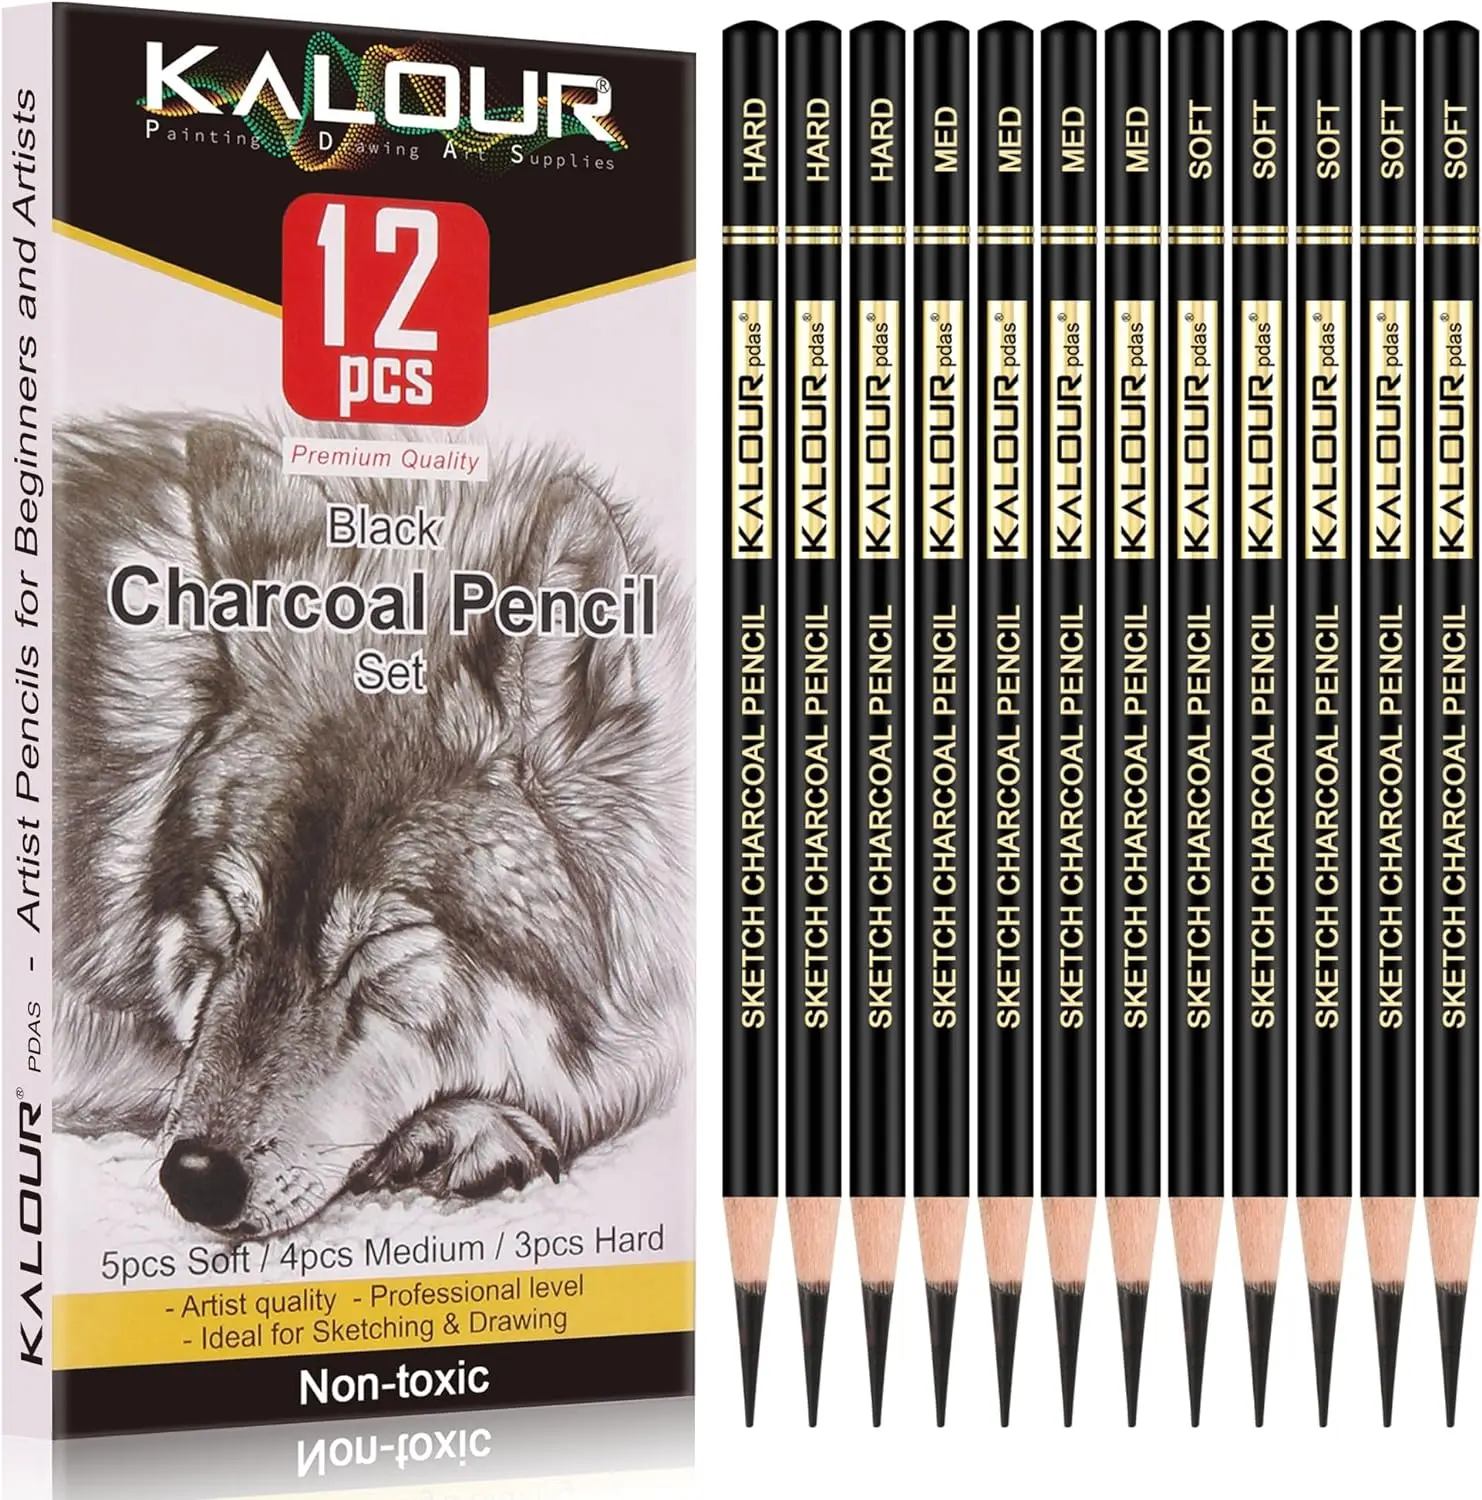 Professional Charcoal Pencils Drawing Set -12 Pieces Soft, Medium and Hard Charcoal Pencils for Drawing, Sketching, Shading, Art